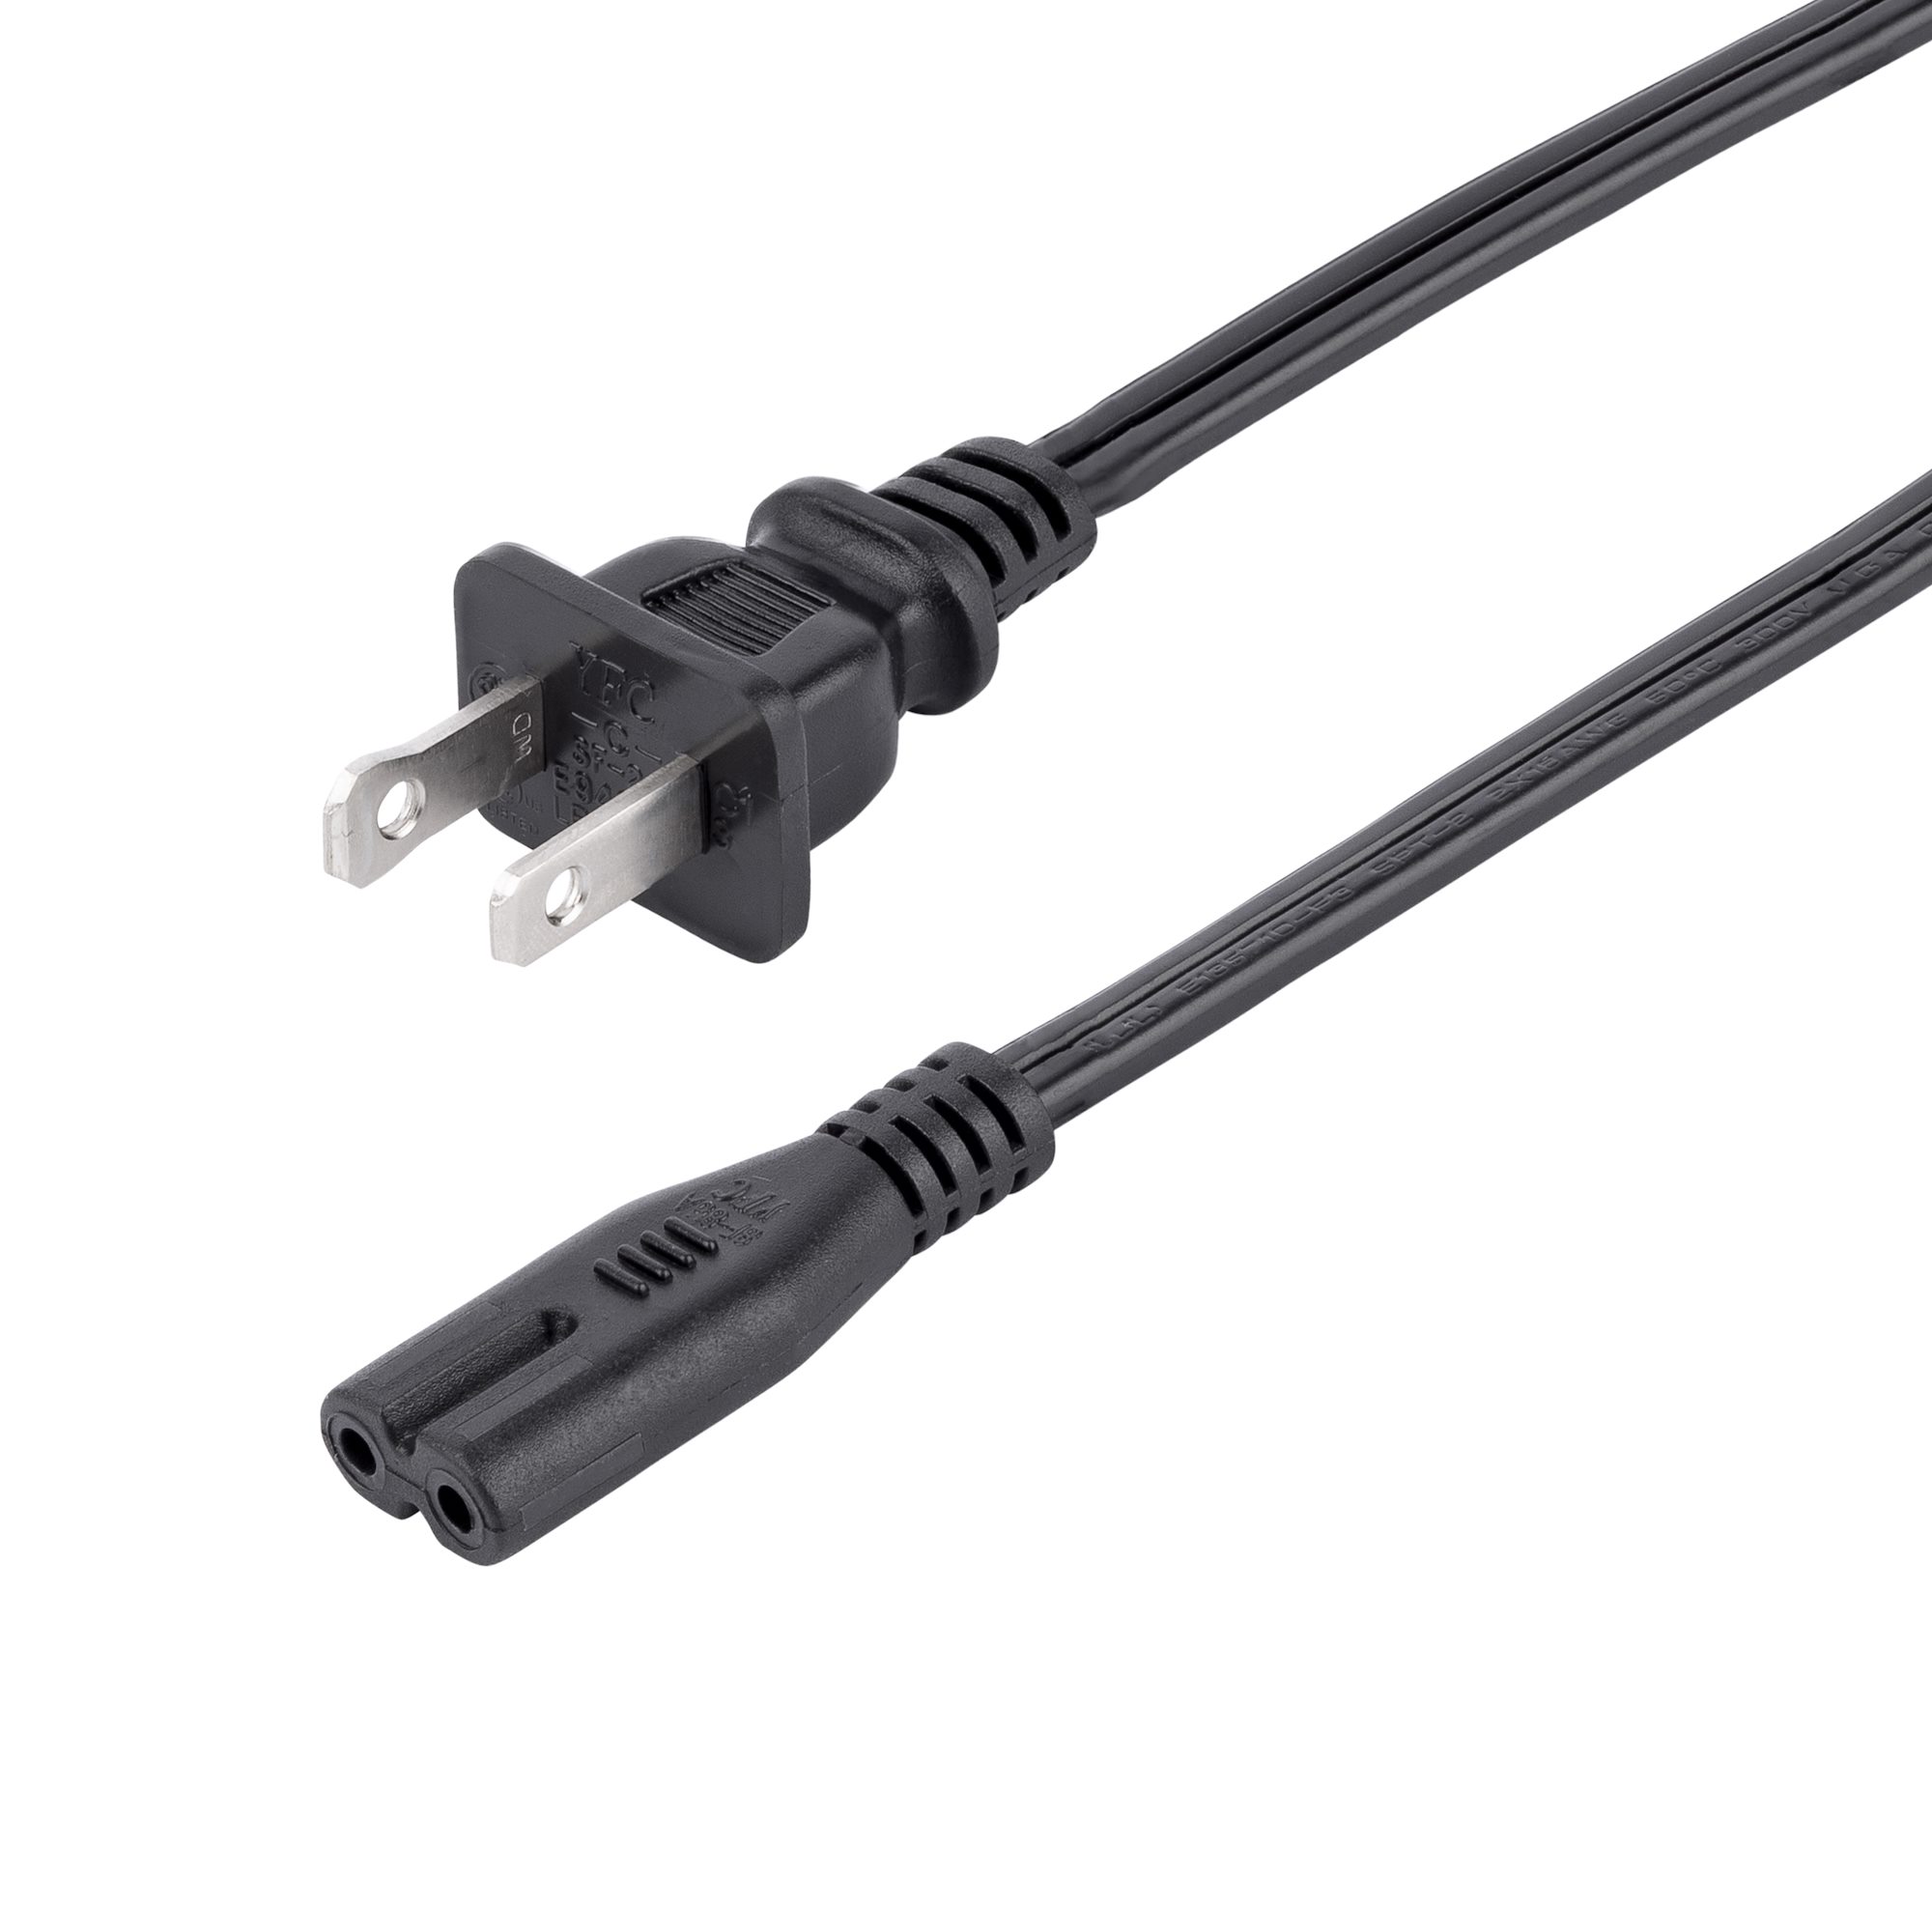 New 10ft Non-Polarized Replacement Power Cord, Works With Game Consoles,  Cable Boxes, Printers